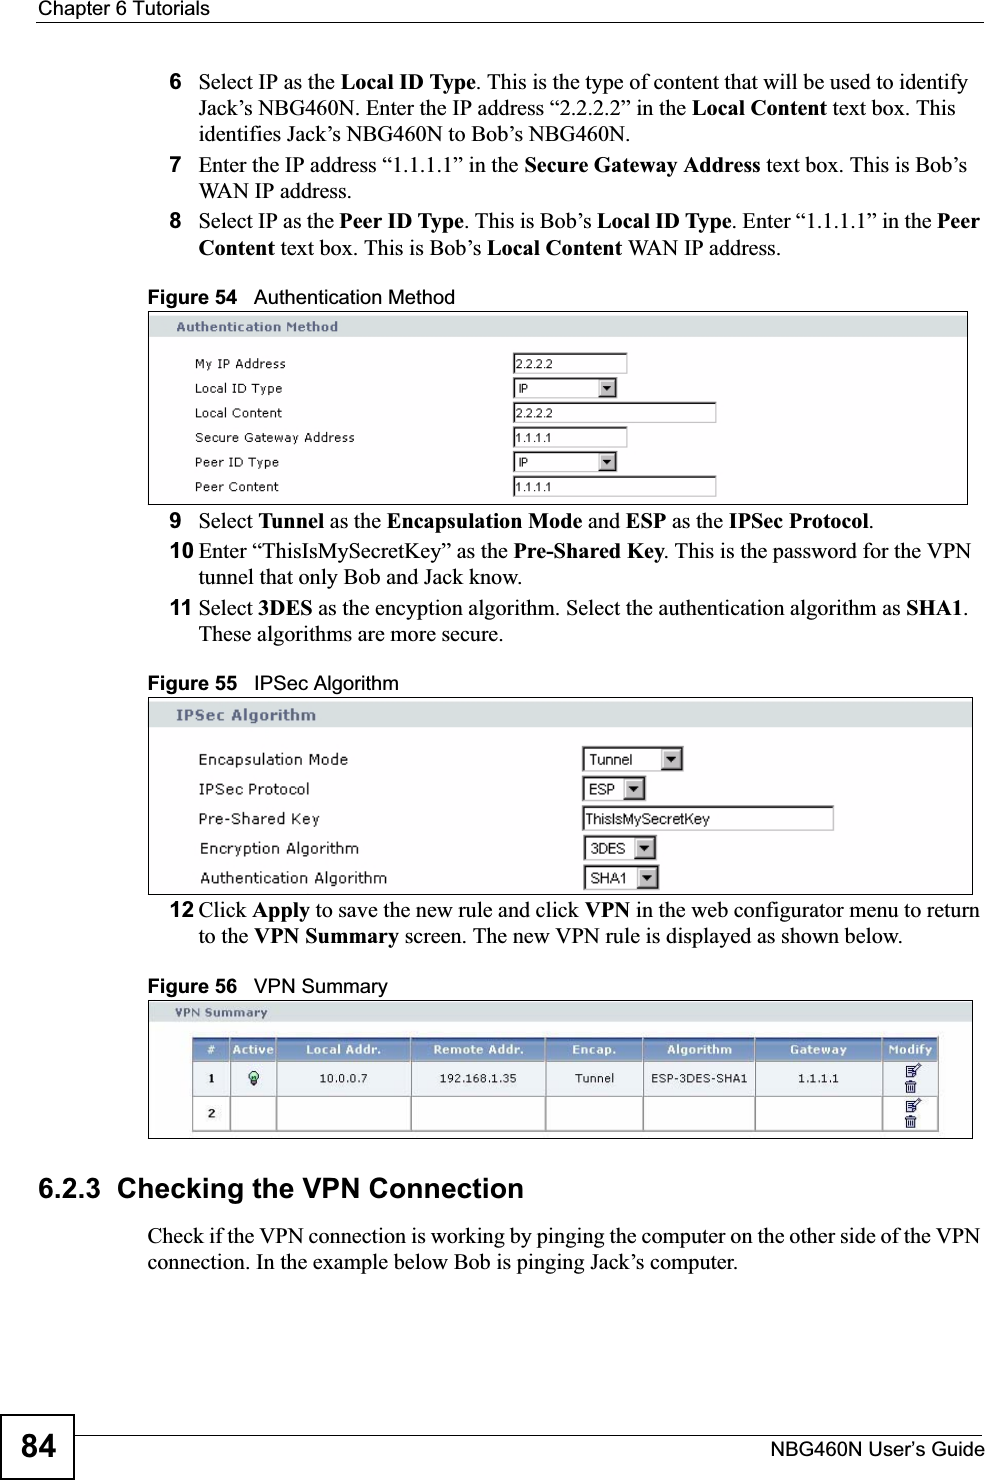 Chapter 6 TutorialsNBG460N User’s Guide846Select IP as the Local ID Type. This is the type of content that will be used to identify Jack’s NBG460N. Enter the IP address “2.2.2.2” in the Local Content text box. This identifies Jack’s NBG460N to Bob’s NBG460N.7Enter the IP address “1.1.1.1” in the Secure Gateway Address text box. This is Bob’s WAN IP address.8Select IP as the Peer ID Type. This is Bob’s Local ID Type. Enter “1.1.1.1” in the PeerContent text box. This is Bob’s Local Content WAN IP address.Figure 54   Authentication Method9Select Tunnel as the Encapsulation Mode and ESP as the IPSec Protocol.10 Enter “ThisIsMySecretKey” as the Pre-Shared Key. This is the password for the VPN tunnel that only Bob and Jack know.11 Select 3DES as the encyption algorithm. Select the authentication algorithm as SHA1.These algorithms are more secure.Figure 55   IPSec Algorithm12 Click Apply to save the new rule and click VPN in the web configurator menu to return to the VPN Summary screen. The new VPN rule is displayed as shown below.Figure 56   VPN Summary6.2.3  Checking the VPN ConnectionCheck if the VPN connection is working by pinging the computer on the other side of the VPN connection. In the example below Bob is pinging Jack’s computer.